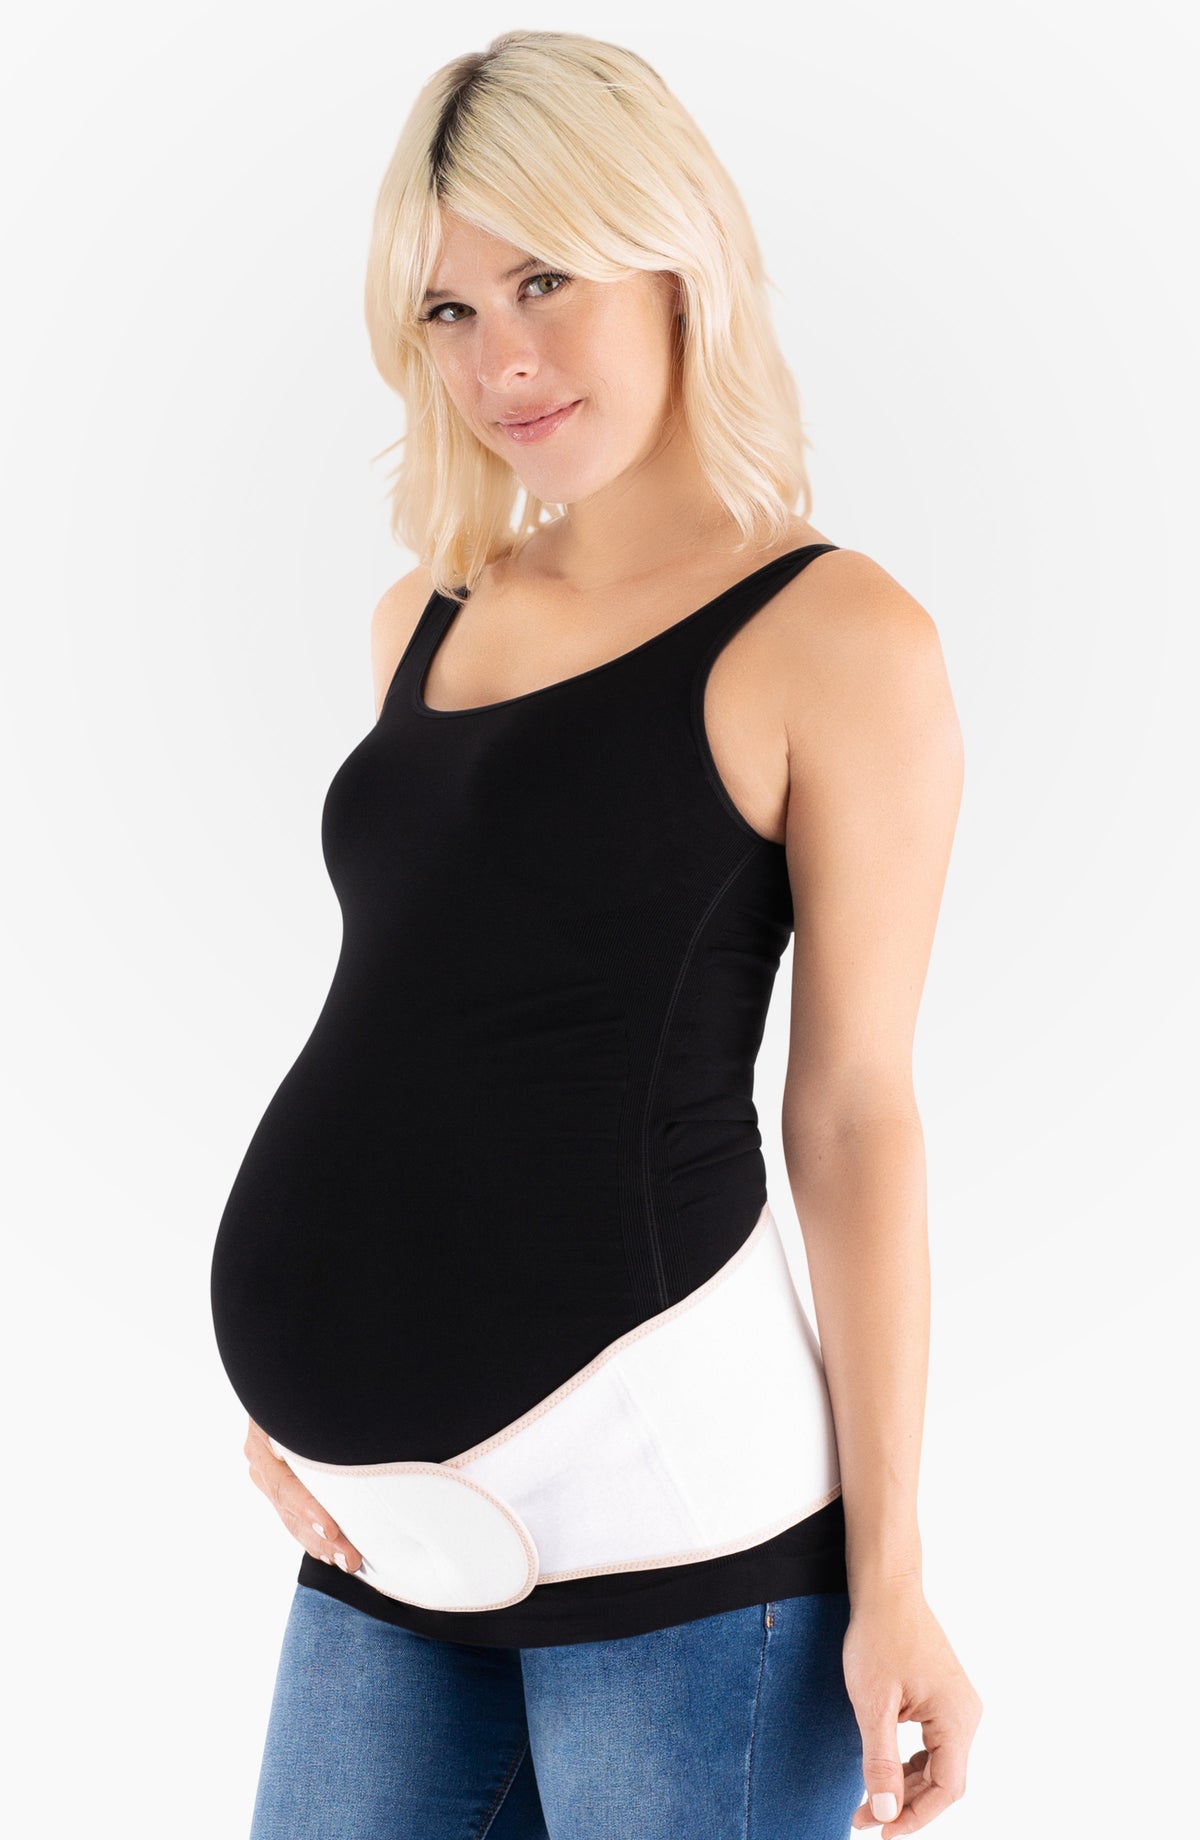 Pregnancy Maternity Recovery Abdominal Shaper Band Girdle Support